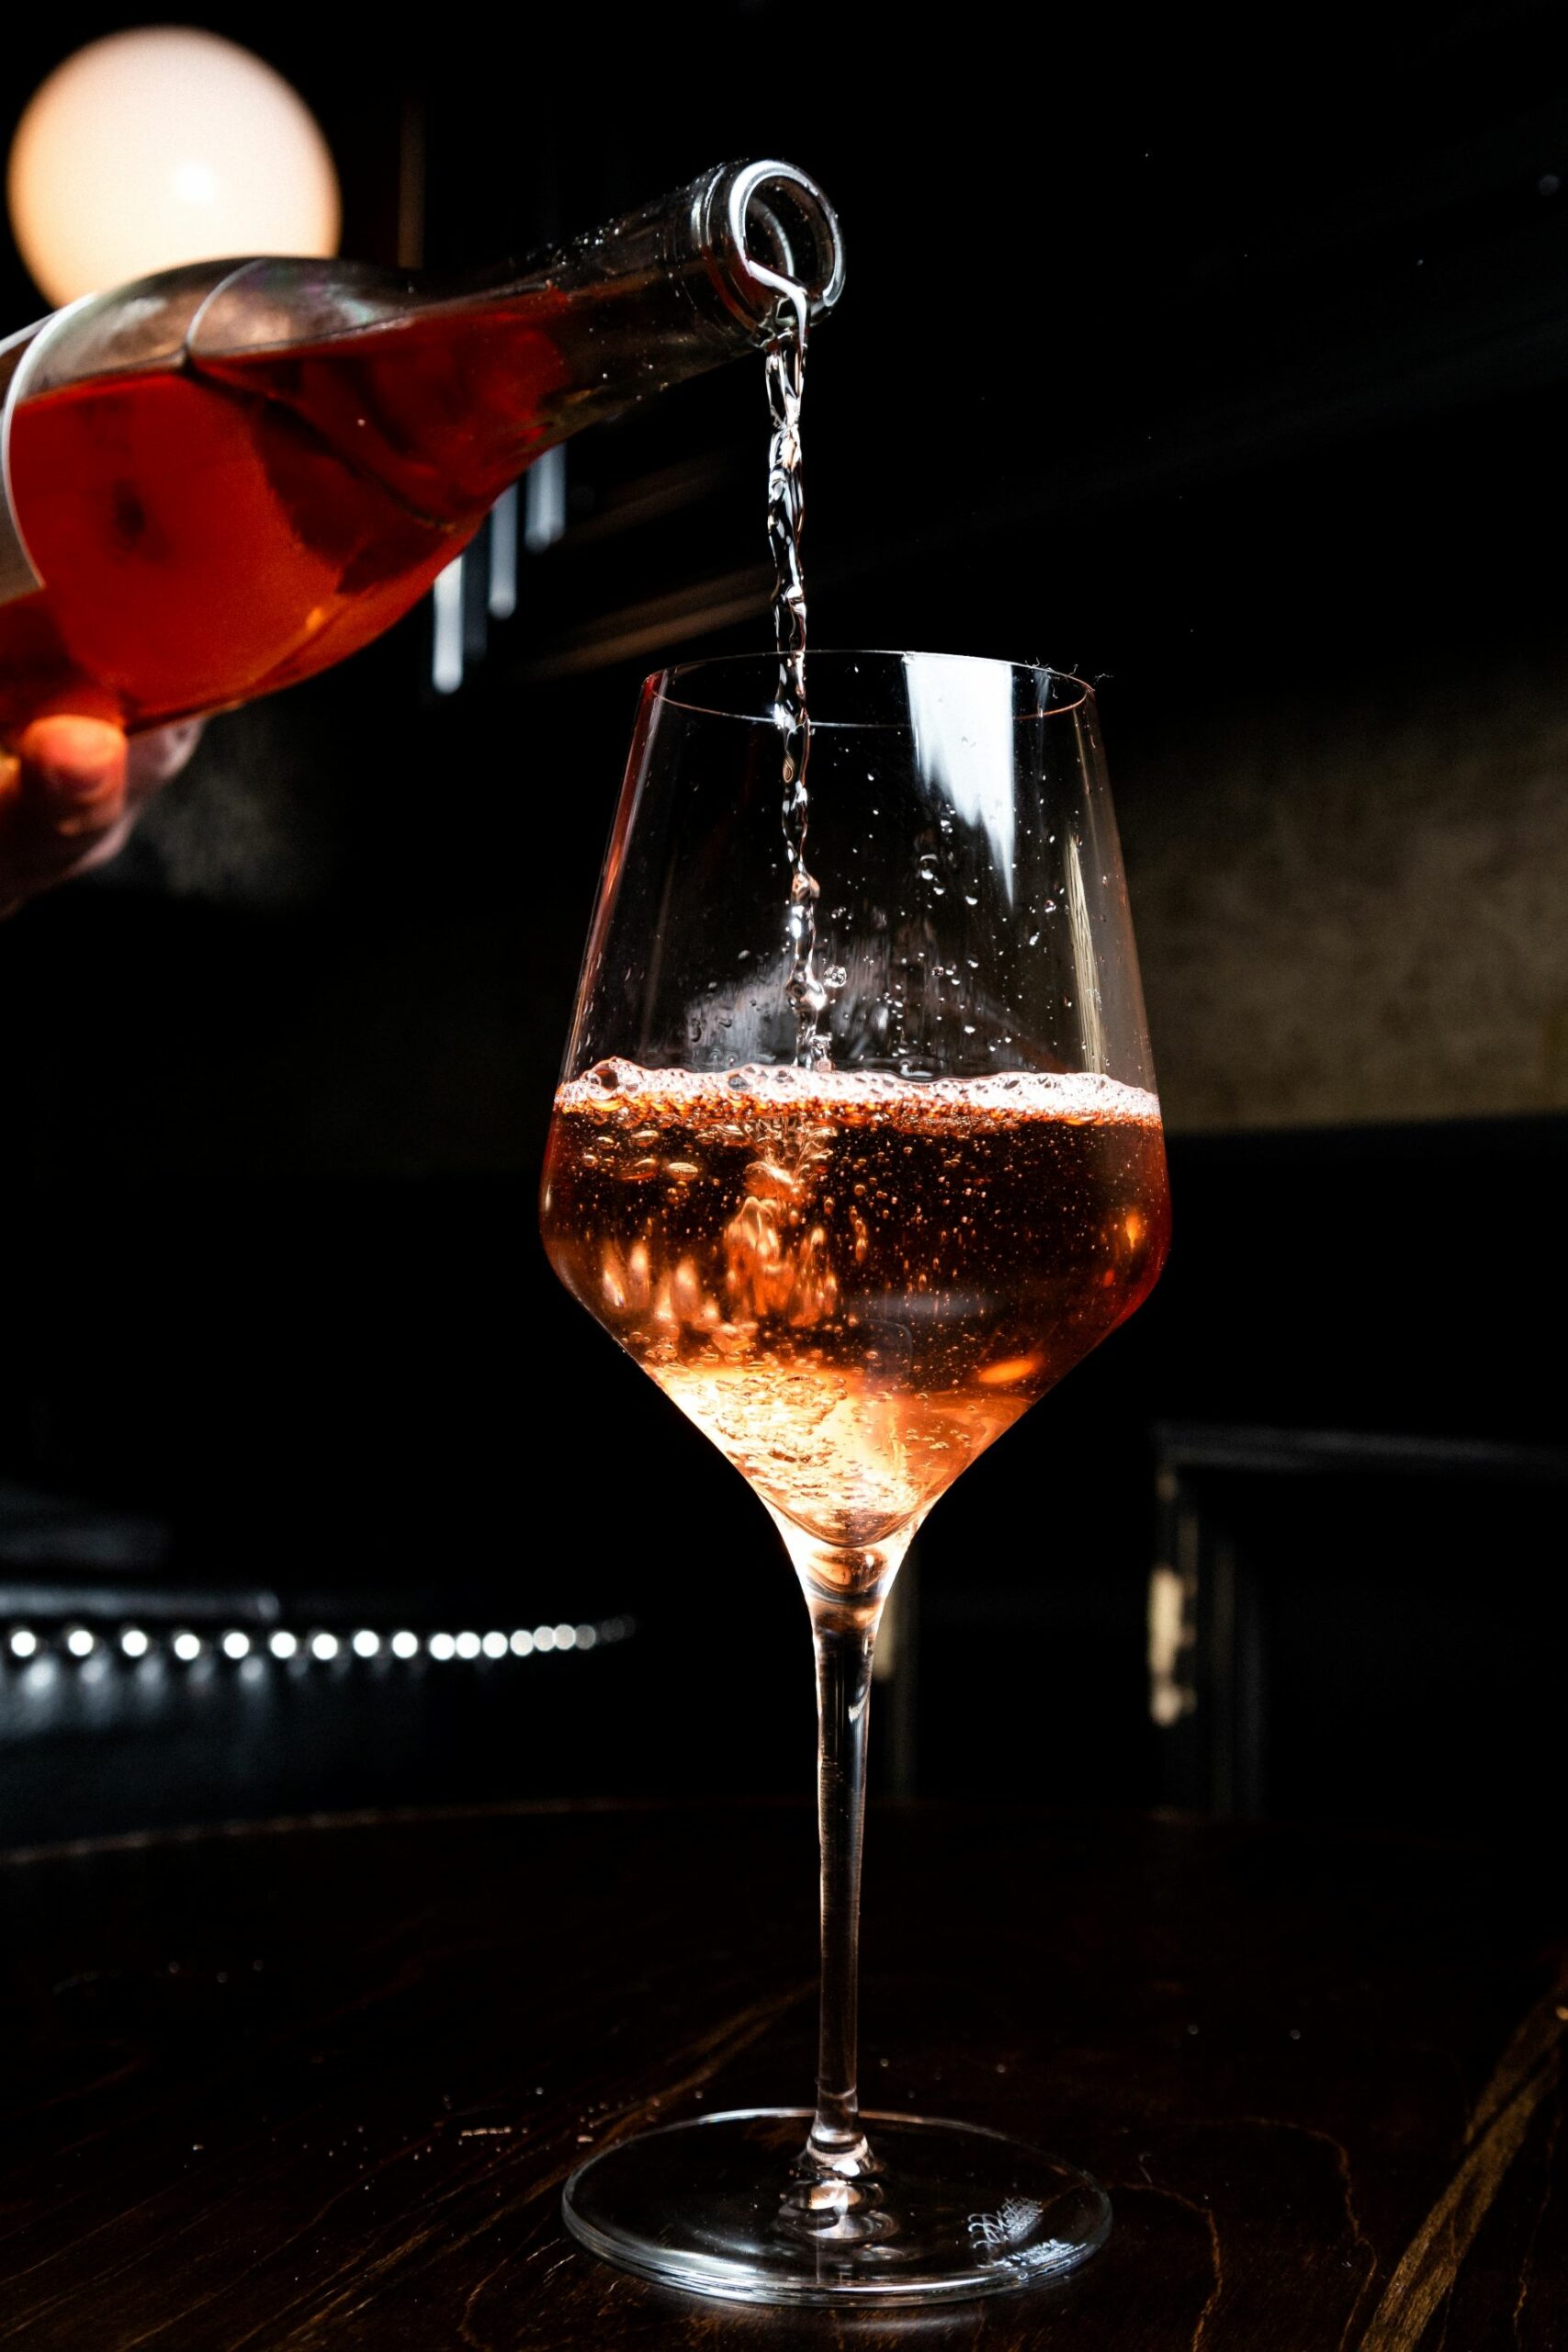 An image of a glass of rose wine.